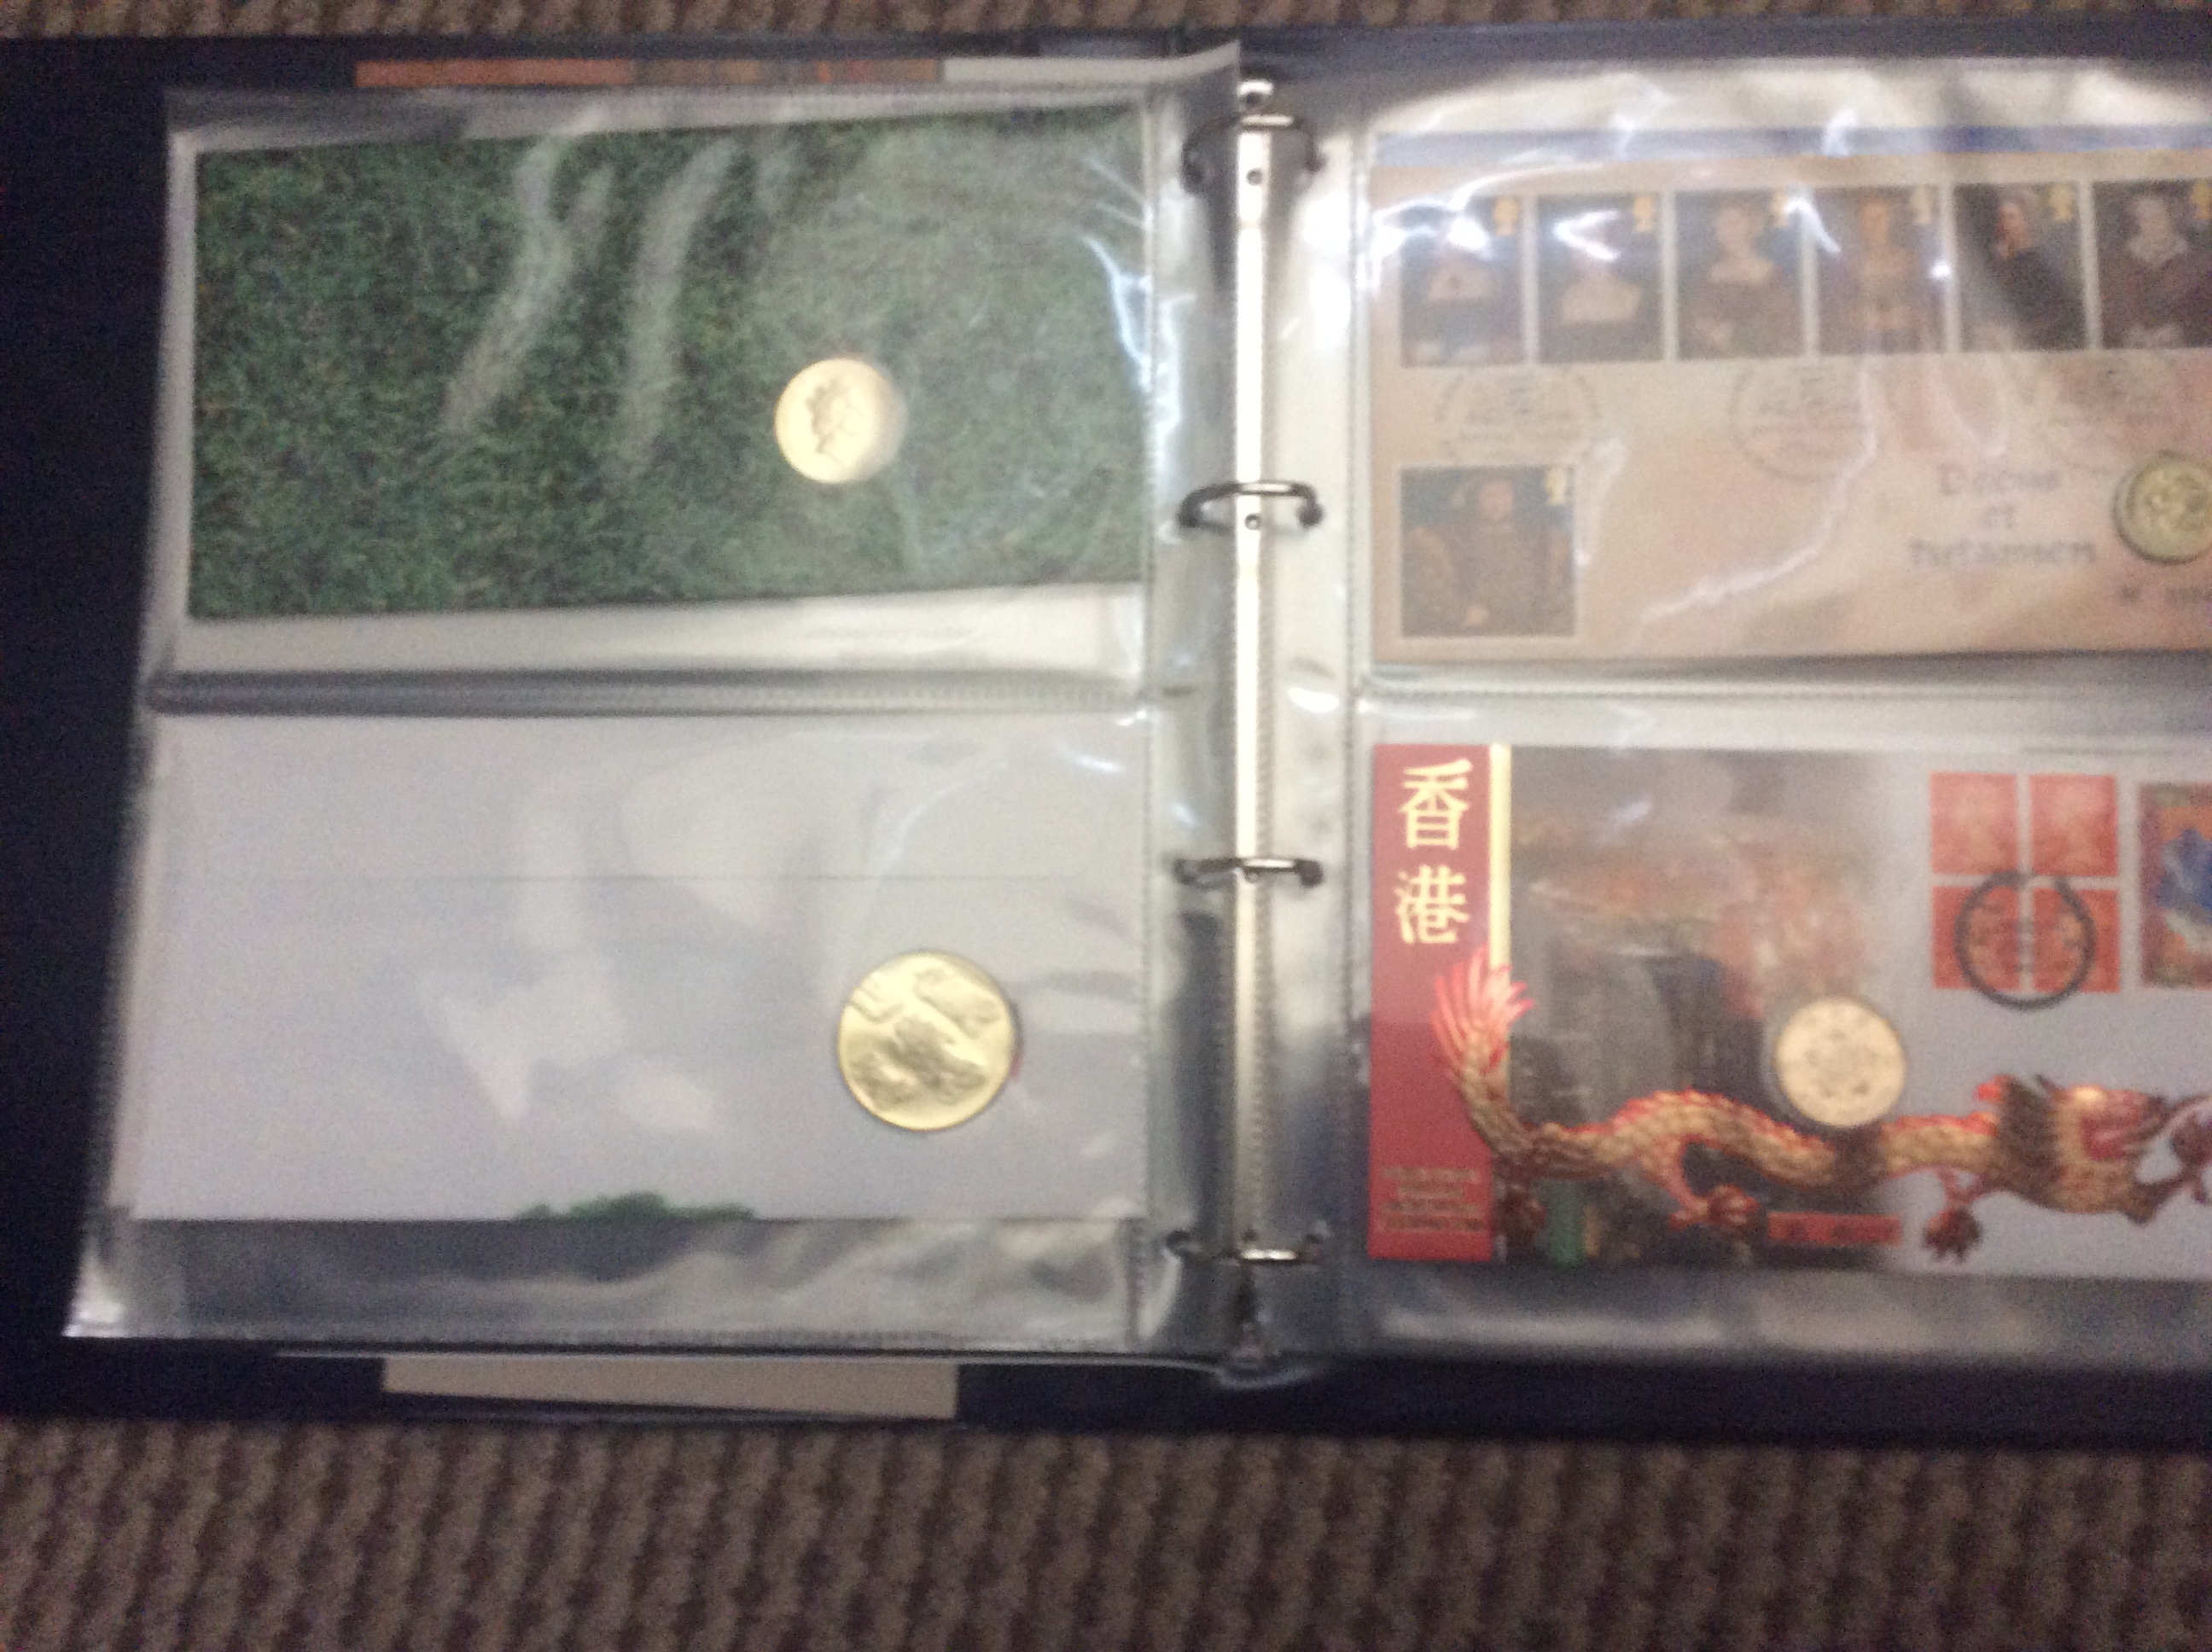 Royal Mail / Royal Mint philatelic numismatic covers in one album - Image 2 of 2